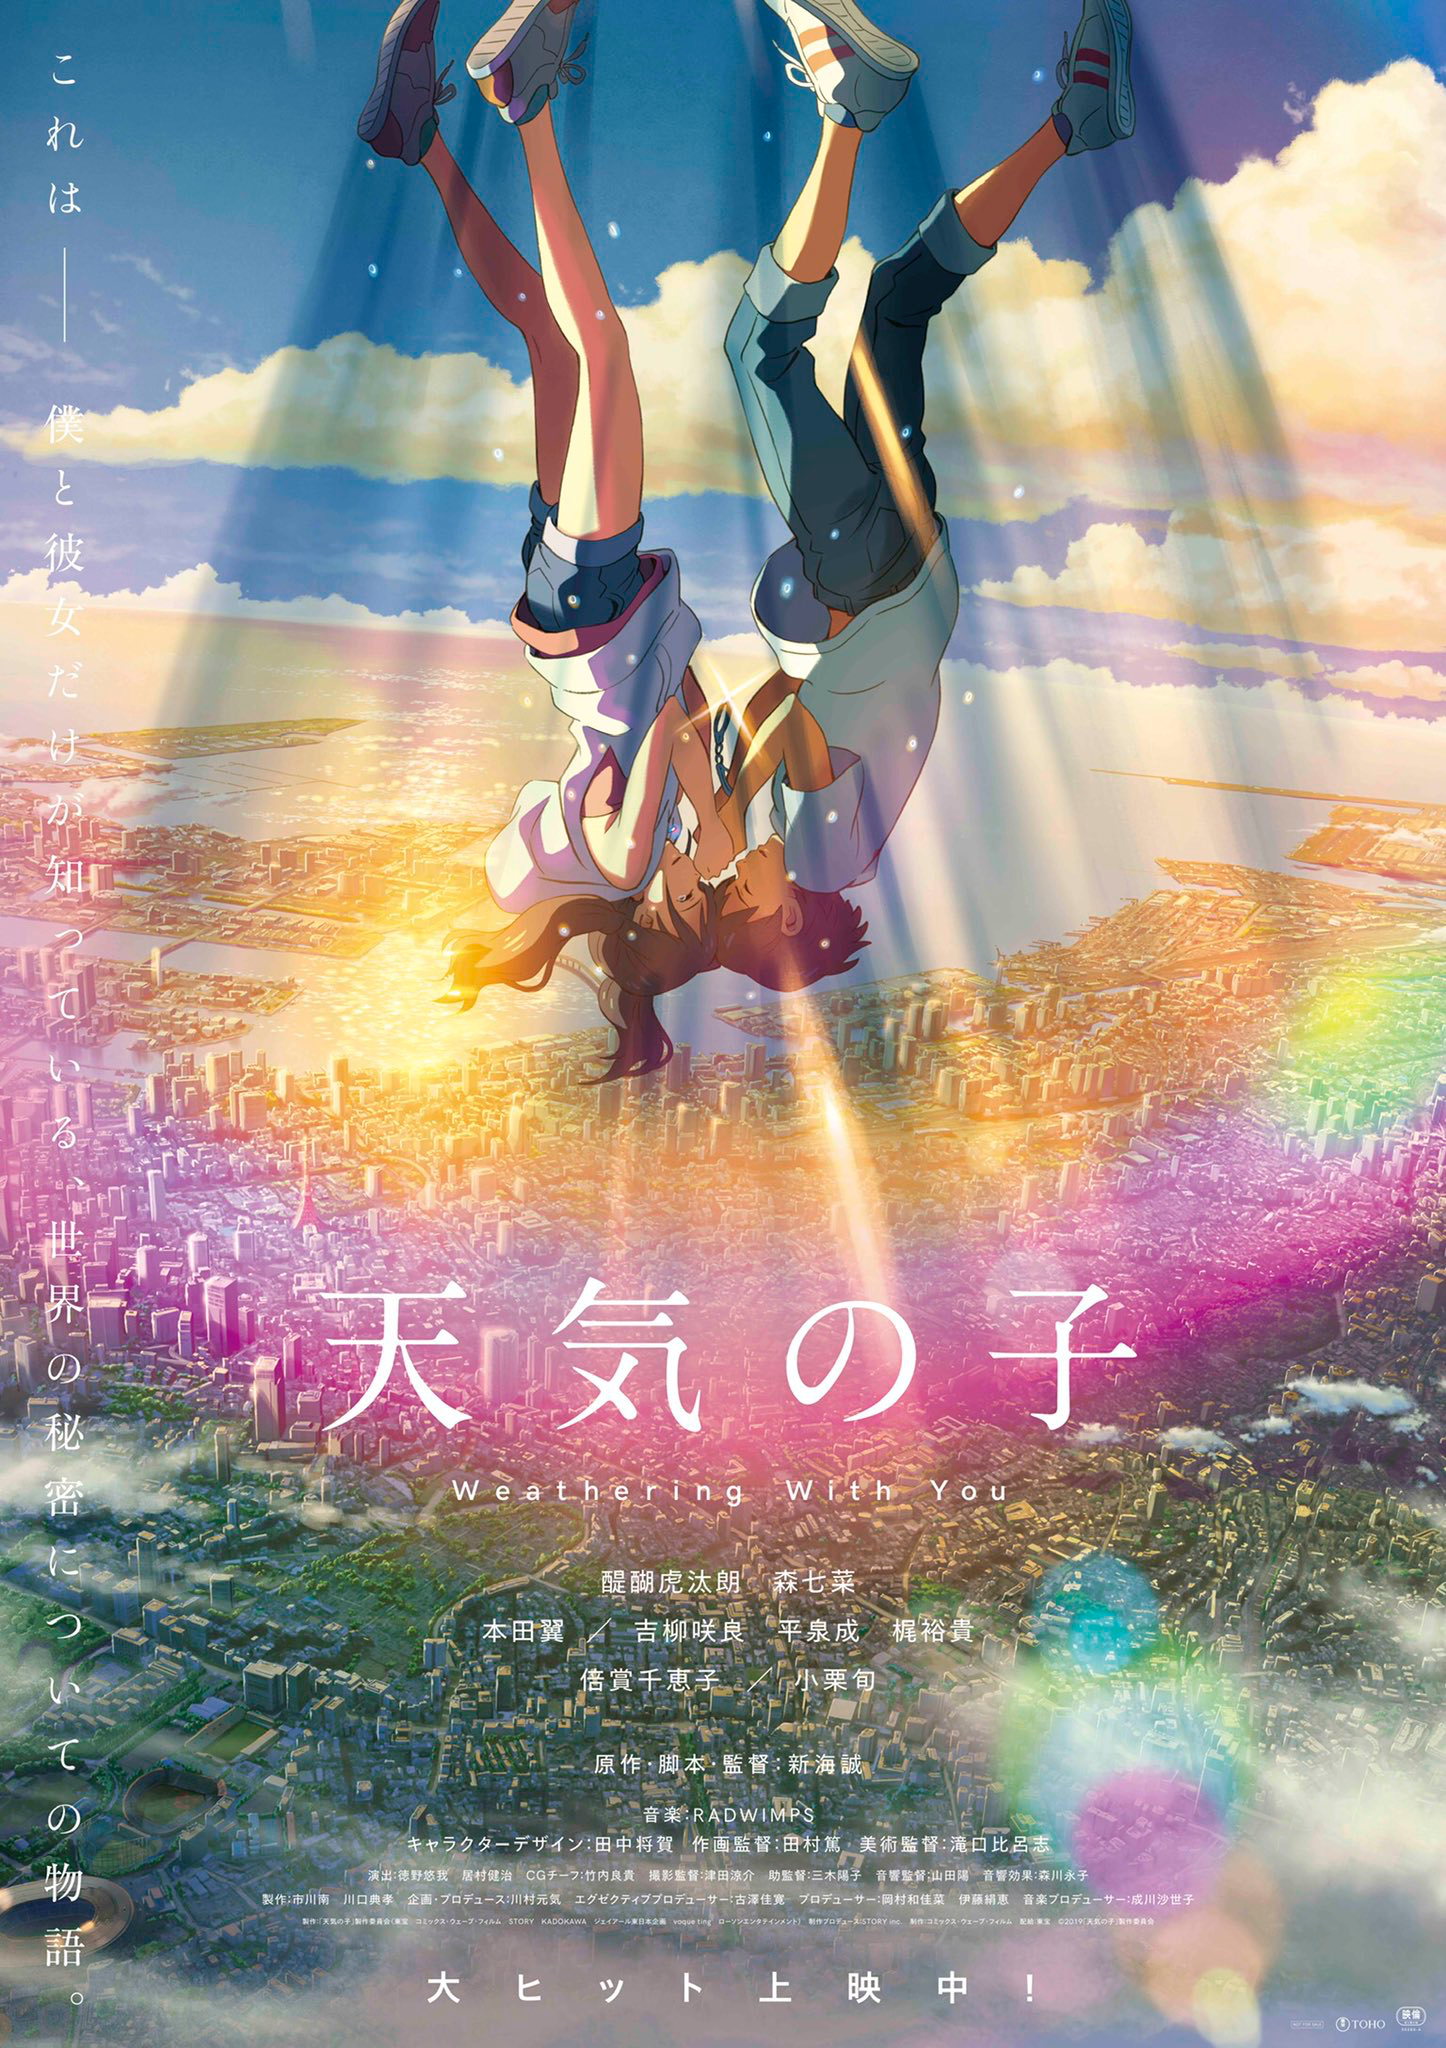 Weathering With You review  thrillingly beautiful anime romance   Animation in film  The Guardian